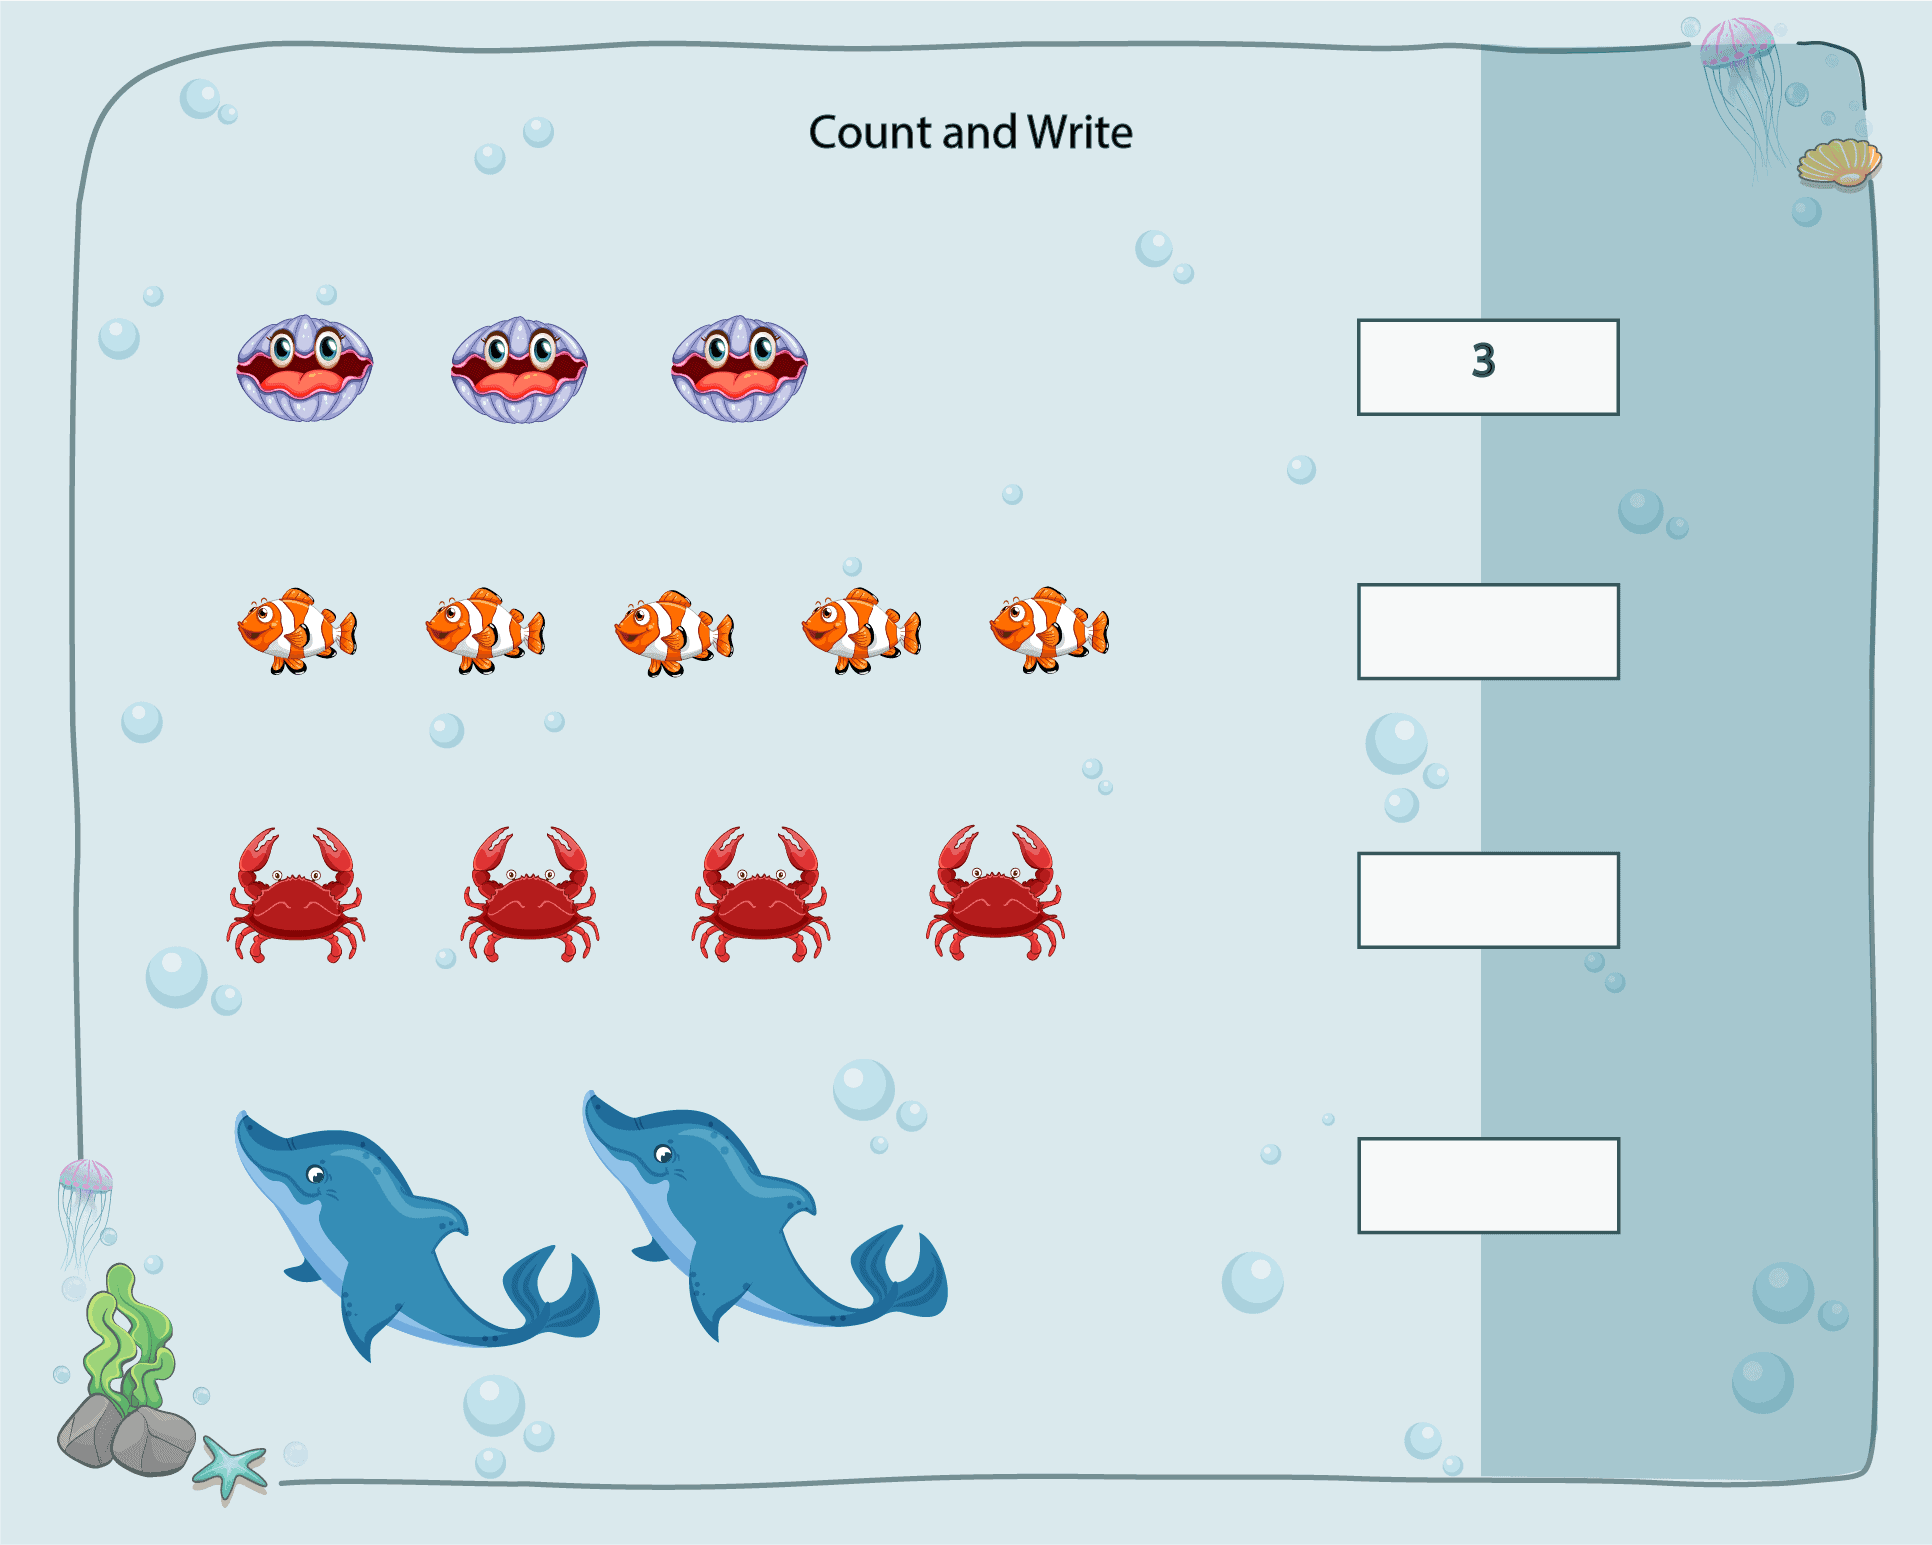 Writing Number of Sea Animals from the Image